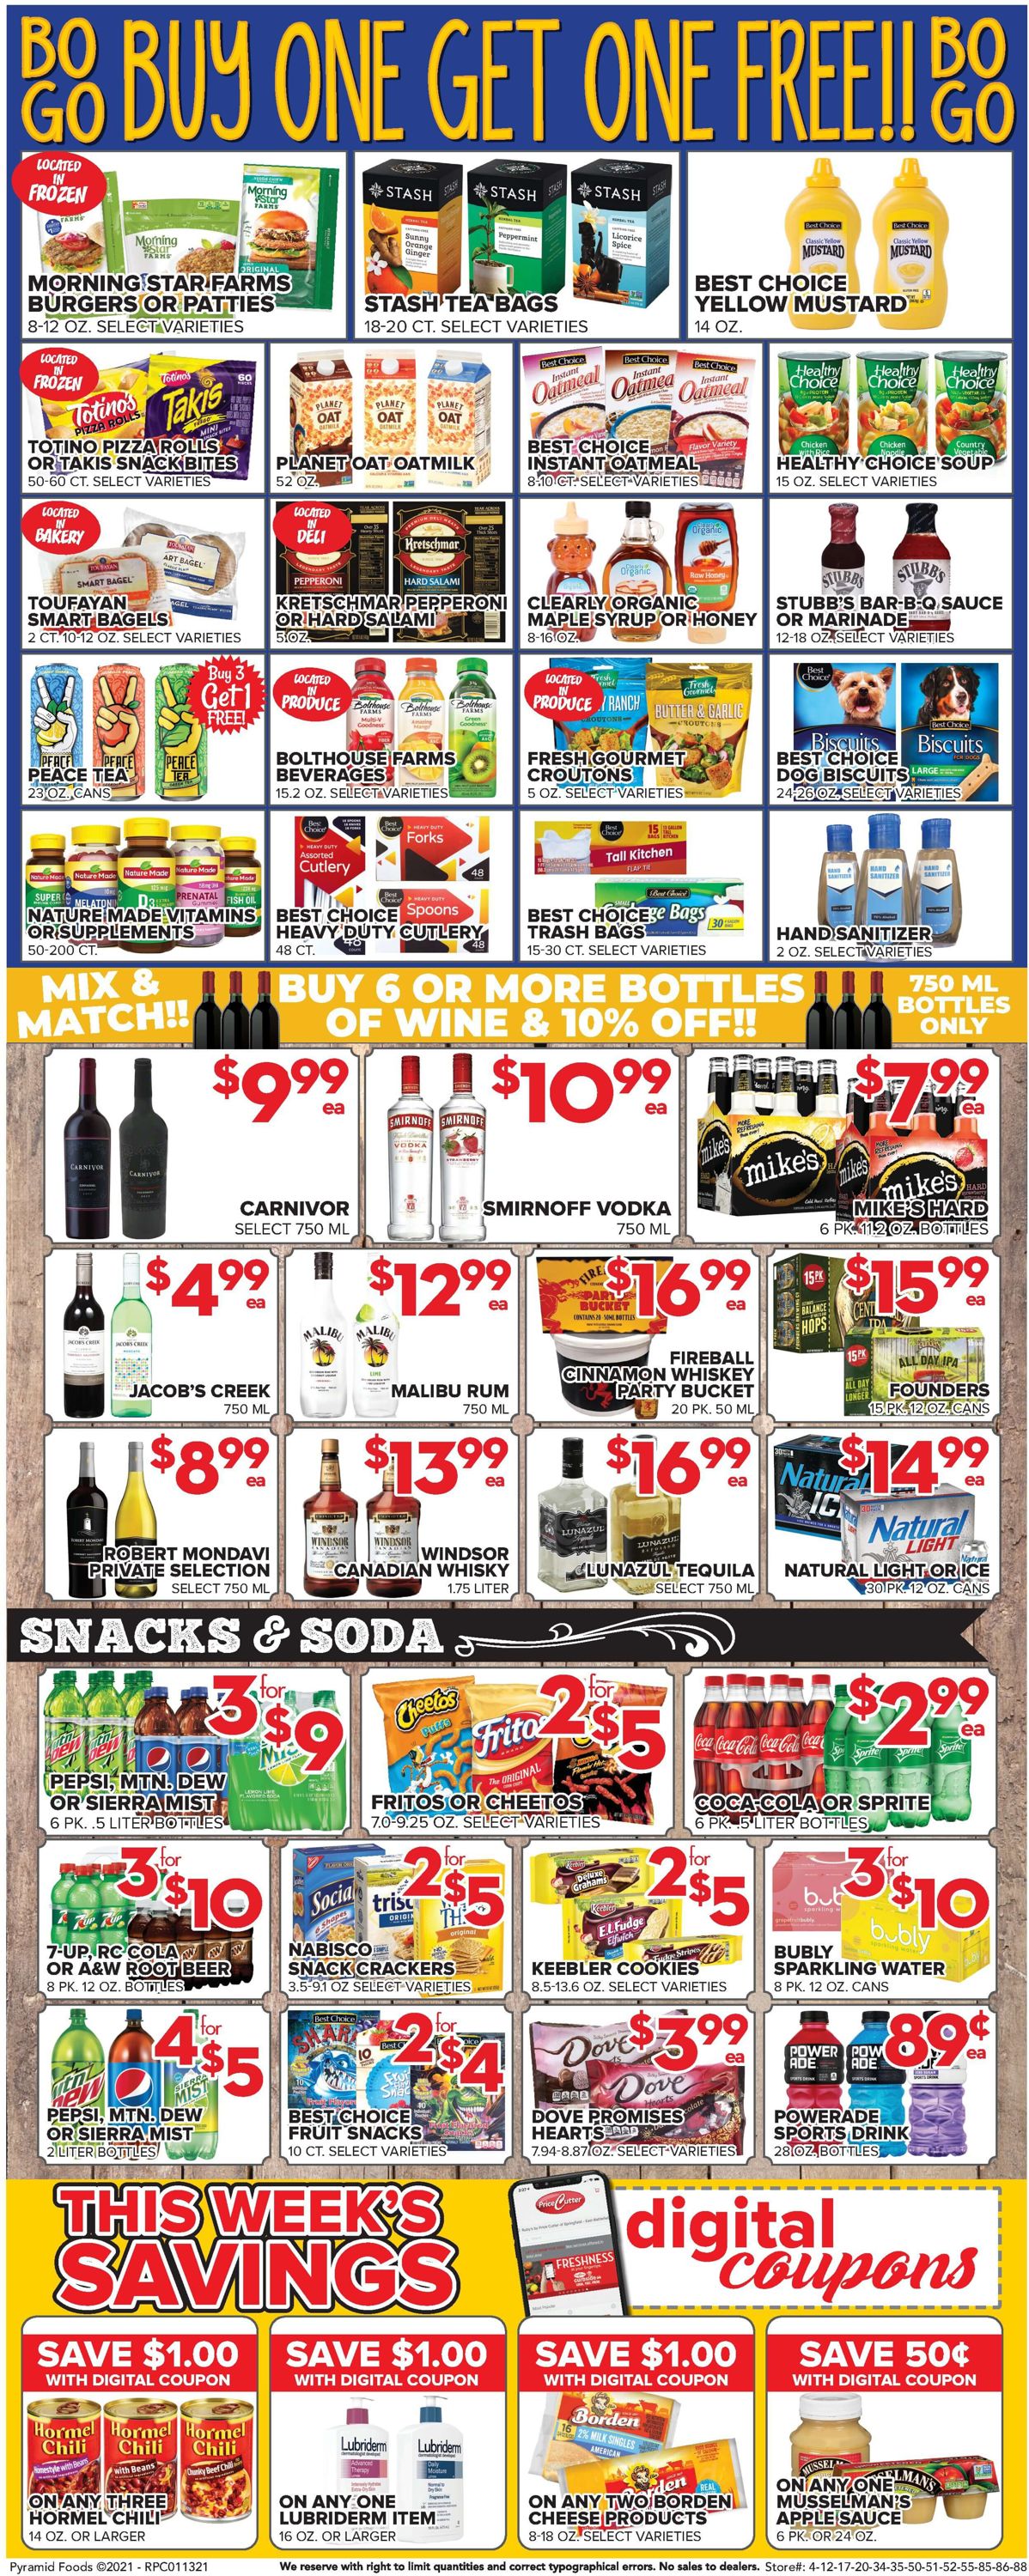 Price Cutter Weekly Ad Circular - valid 01/13-01/19/2021 (Page 4)